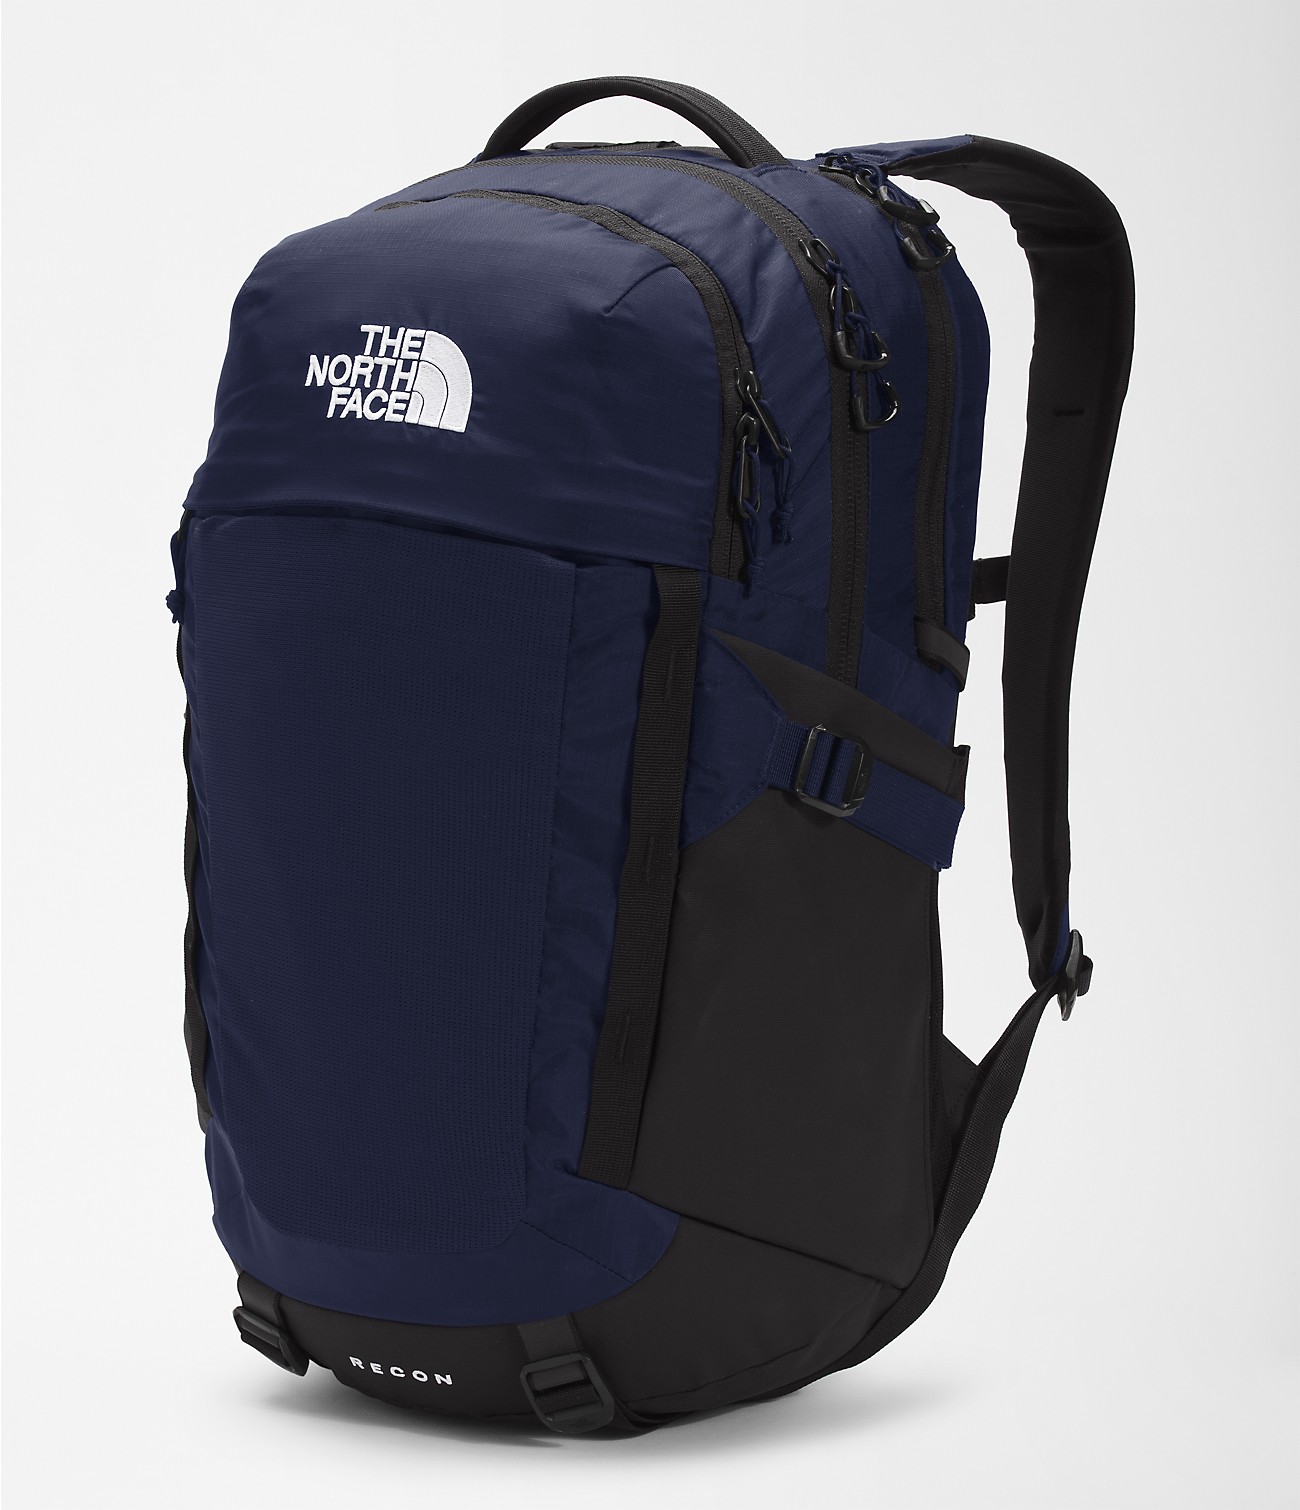 Unlock Wilderness' choice in the Carhartt Vs North Face comparison, the Recon Backpack by The North Face